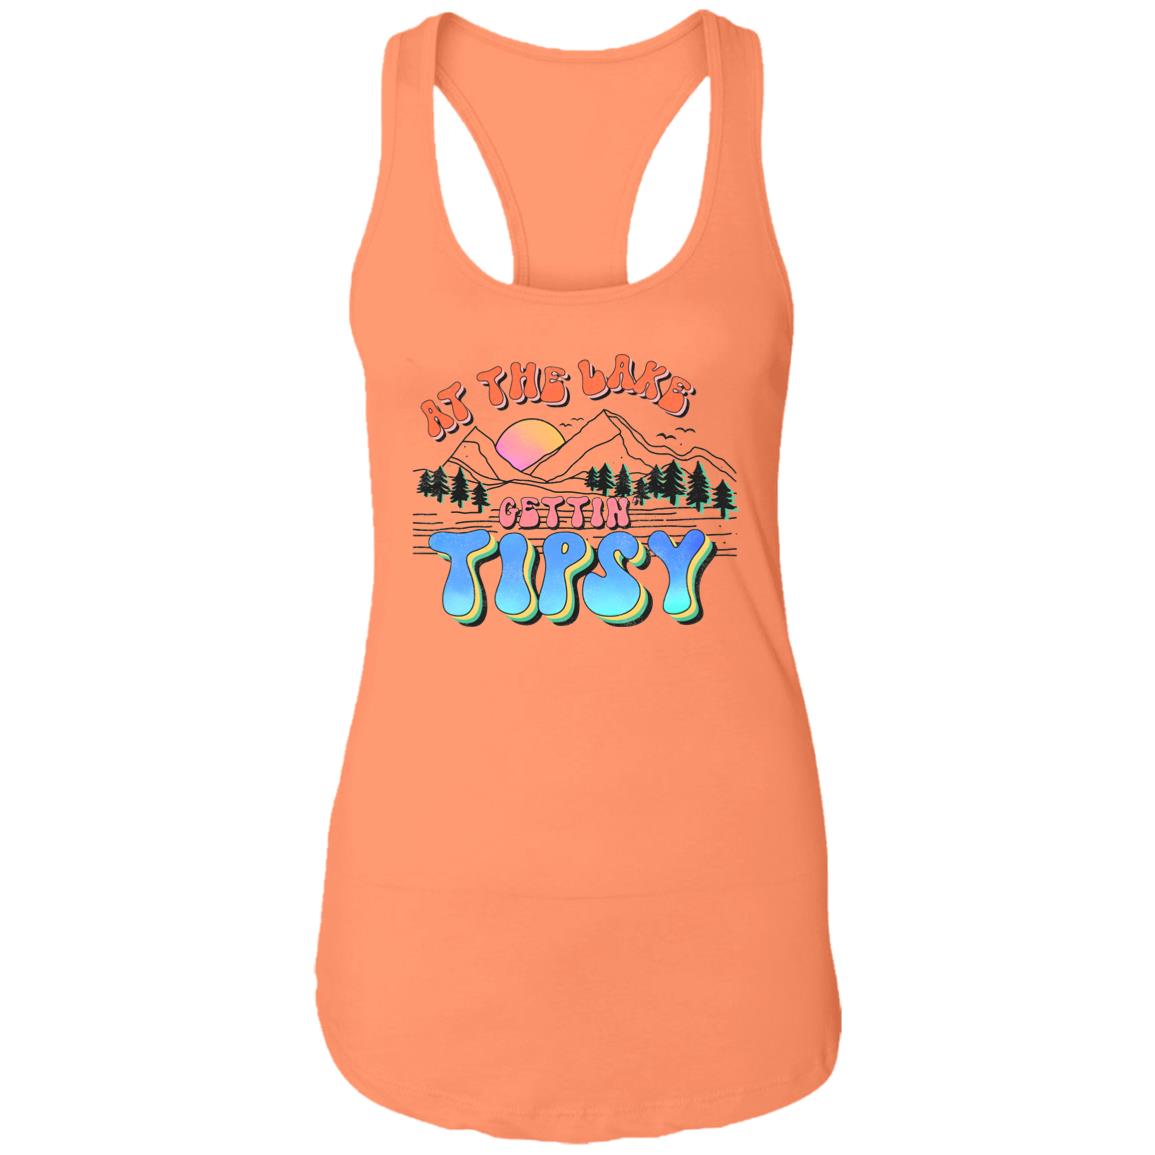 At the Lake Gettin' Tipsy HRCL LL 2 Sided NL1533 Ladies Ideal Racerback Tank